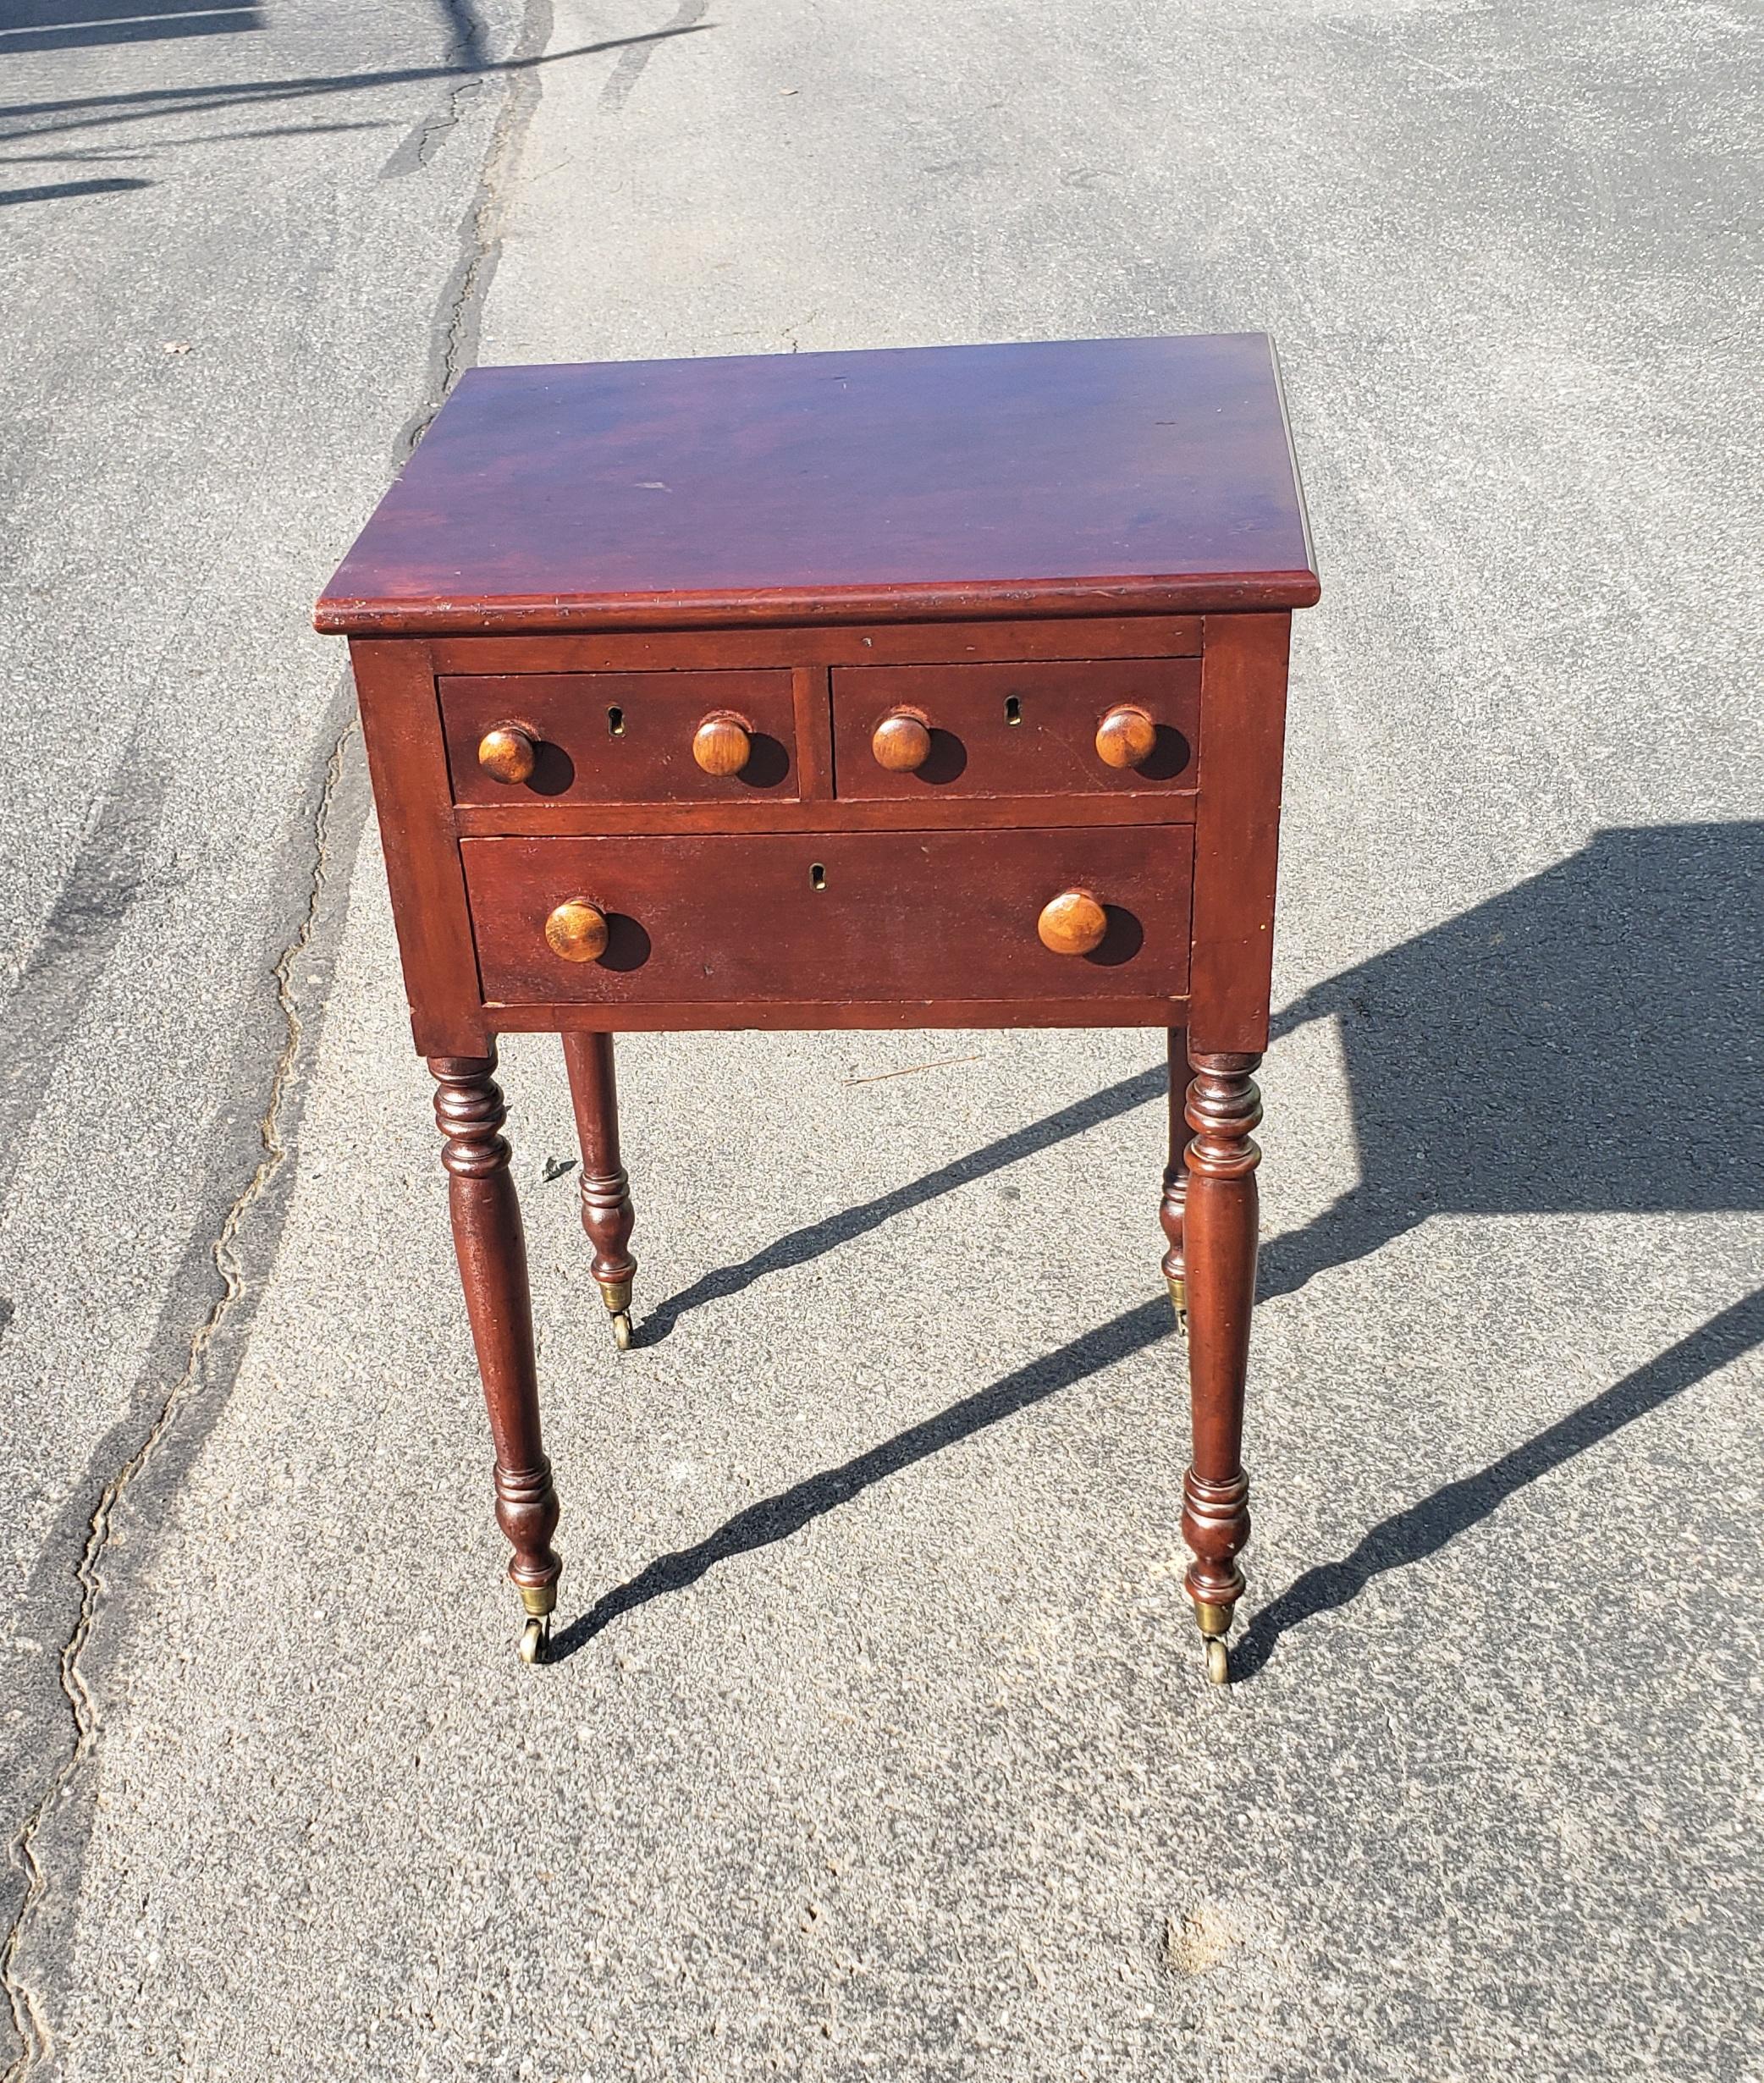 19th Century 3-drawer turned legs mahogany work table on wheels.
Features two smaller top drawers measuring 6.75